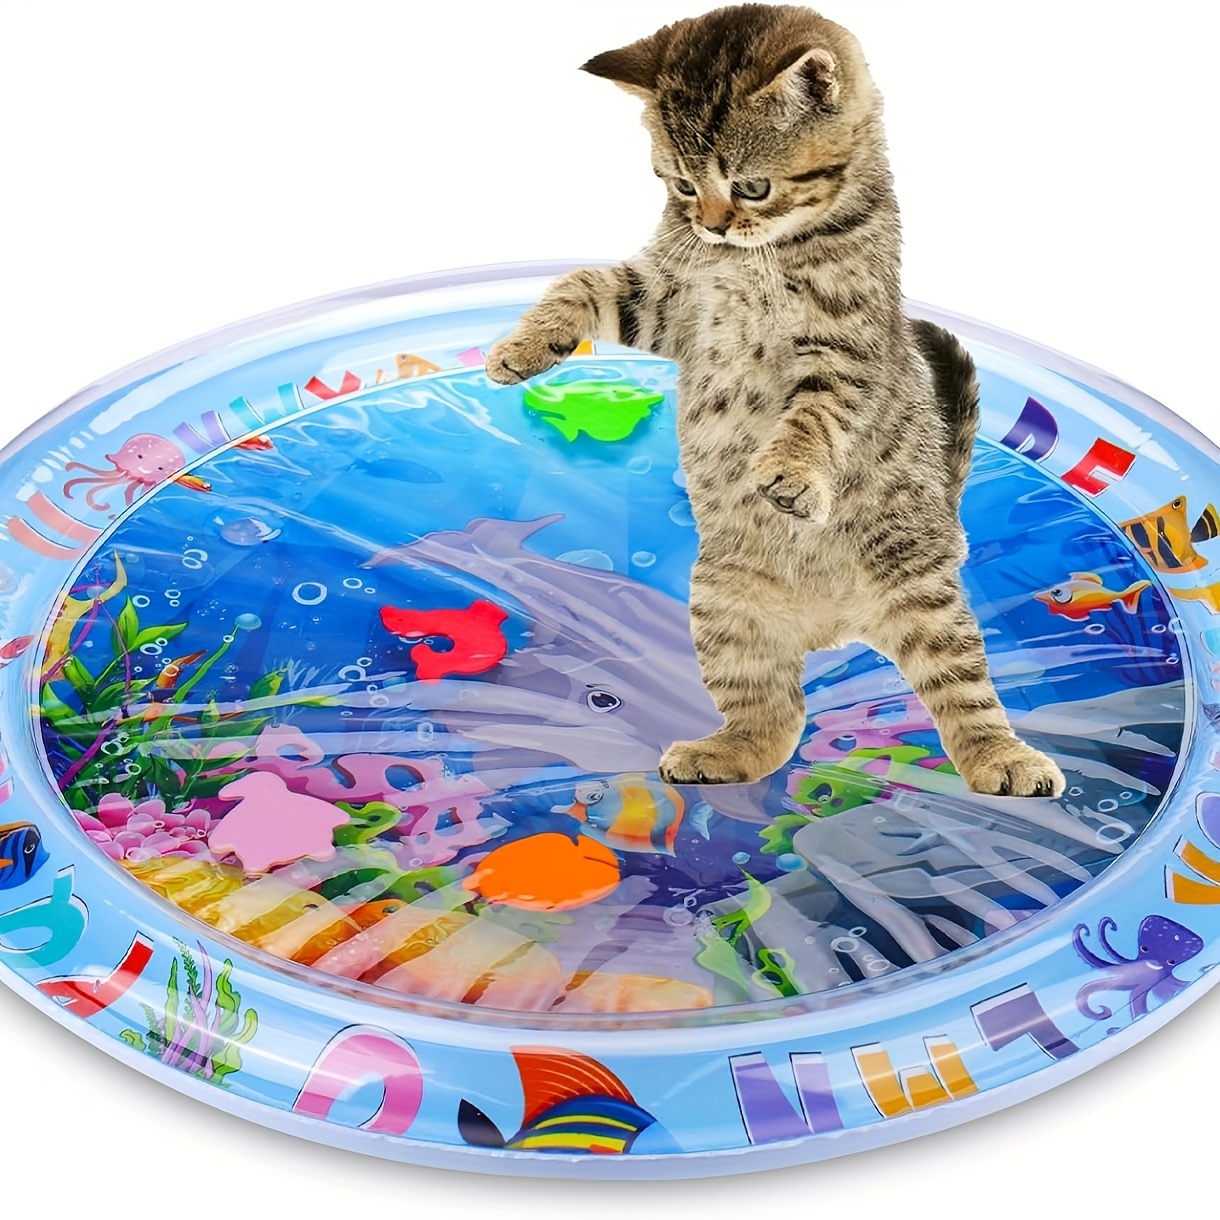 

Interactive Cat Water Sensory Play Mat, Pvc Non-electric Splash Pad With Colorful Undersea Design, Self-entertaining Activity Mat Toy For Indoor Cats, Kick & Play Stimulating Toy For Bored Cats